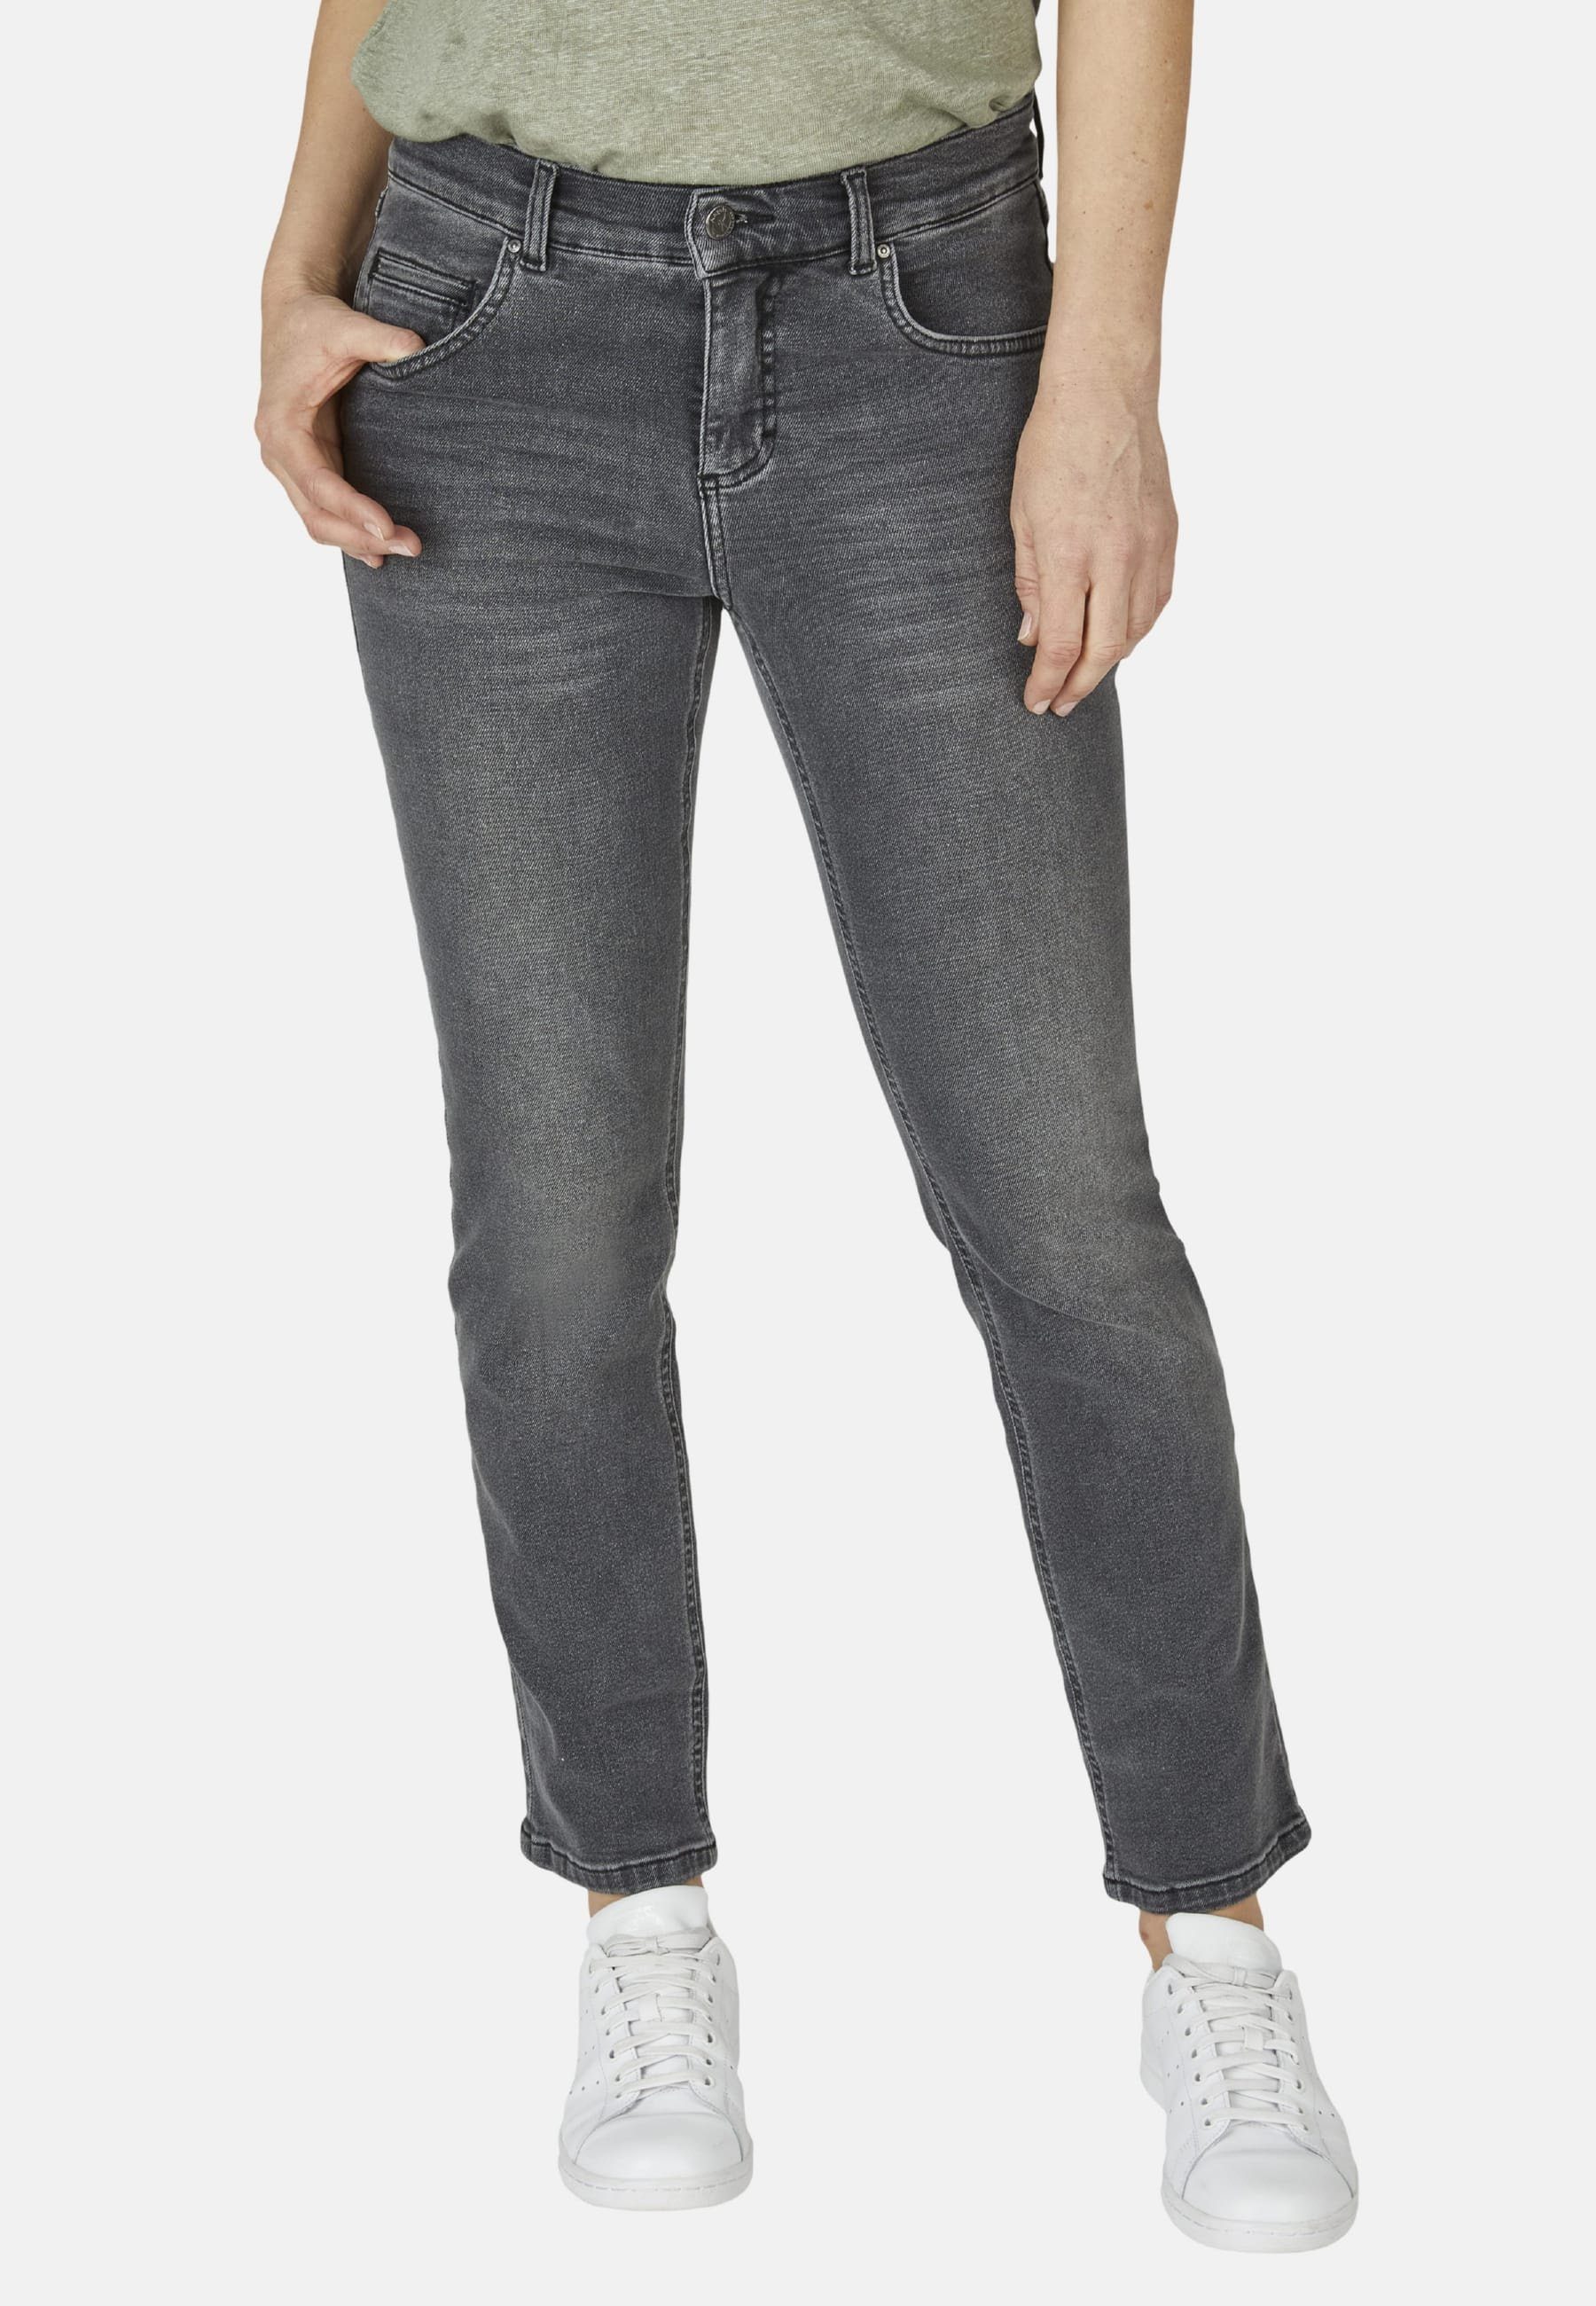 Cici Used-Waschung Straight-Jeans mit Label-Applikationen Jeans mit ANGELS grau